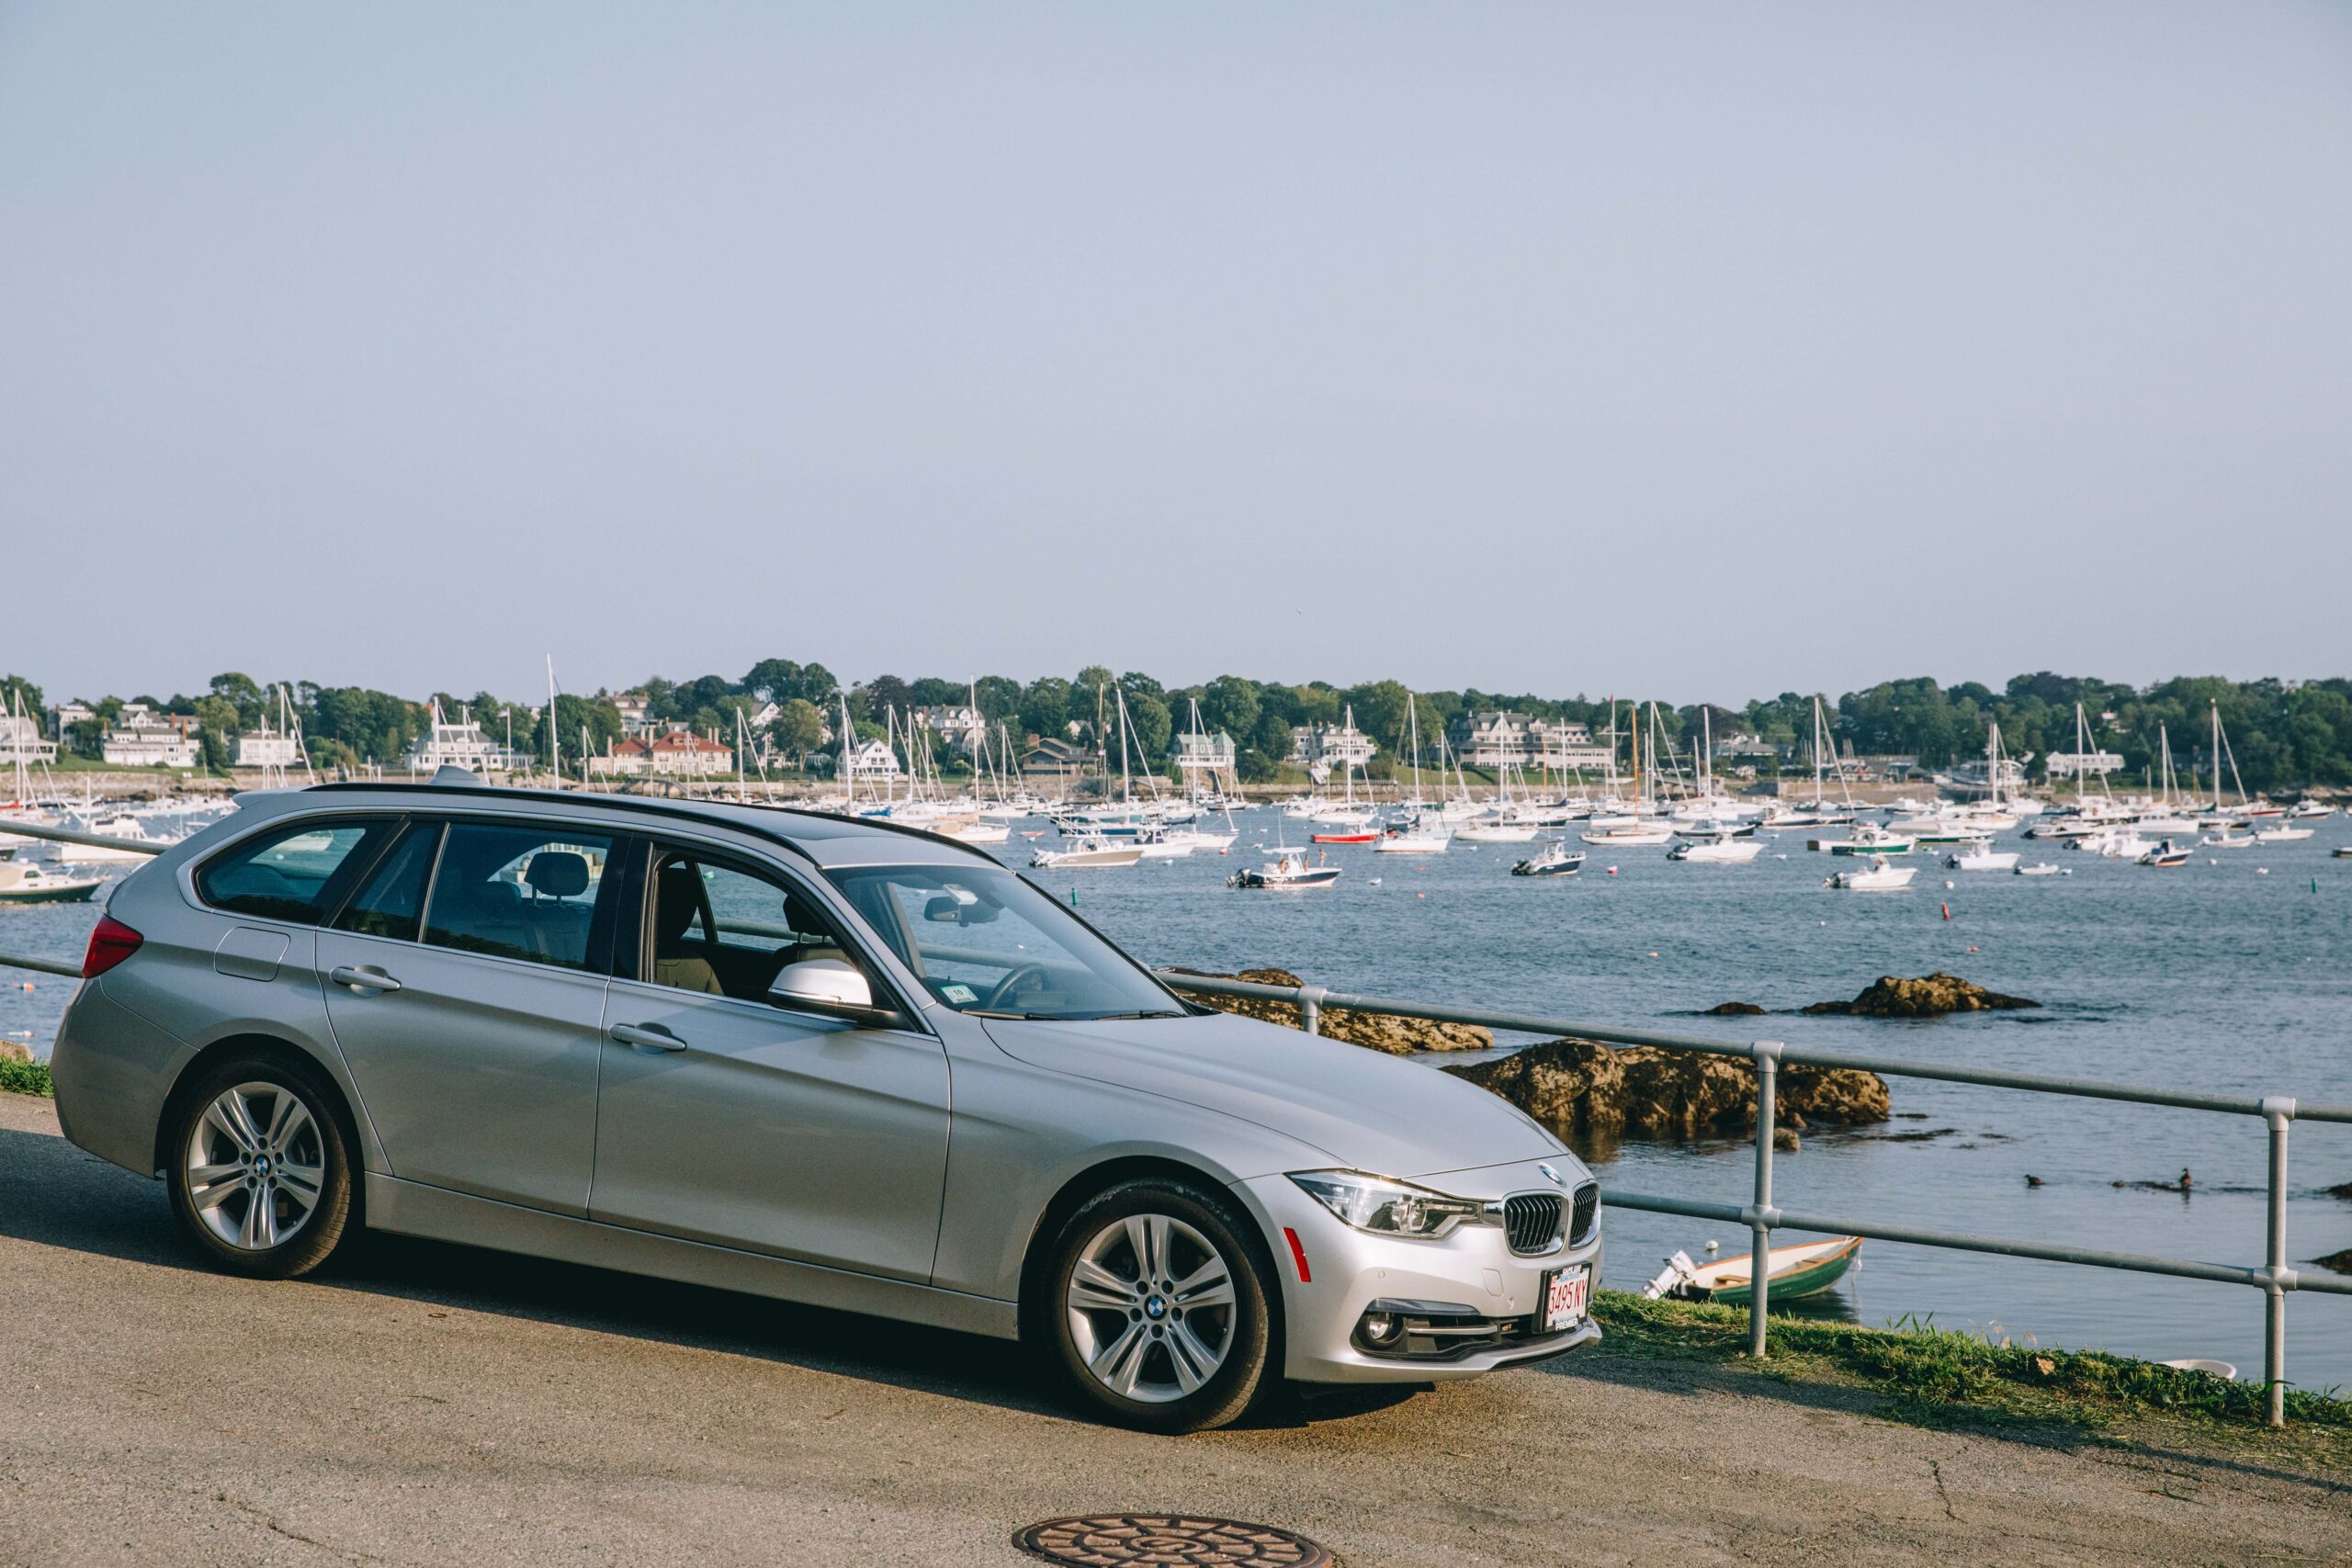 BMW's Last 3 Series Wagon On U.S. Shores Is A Lovely Little Daily